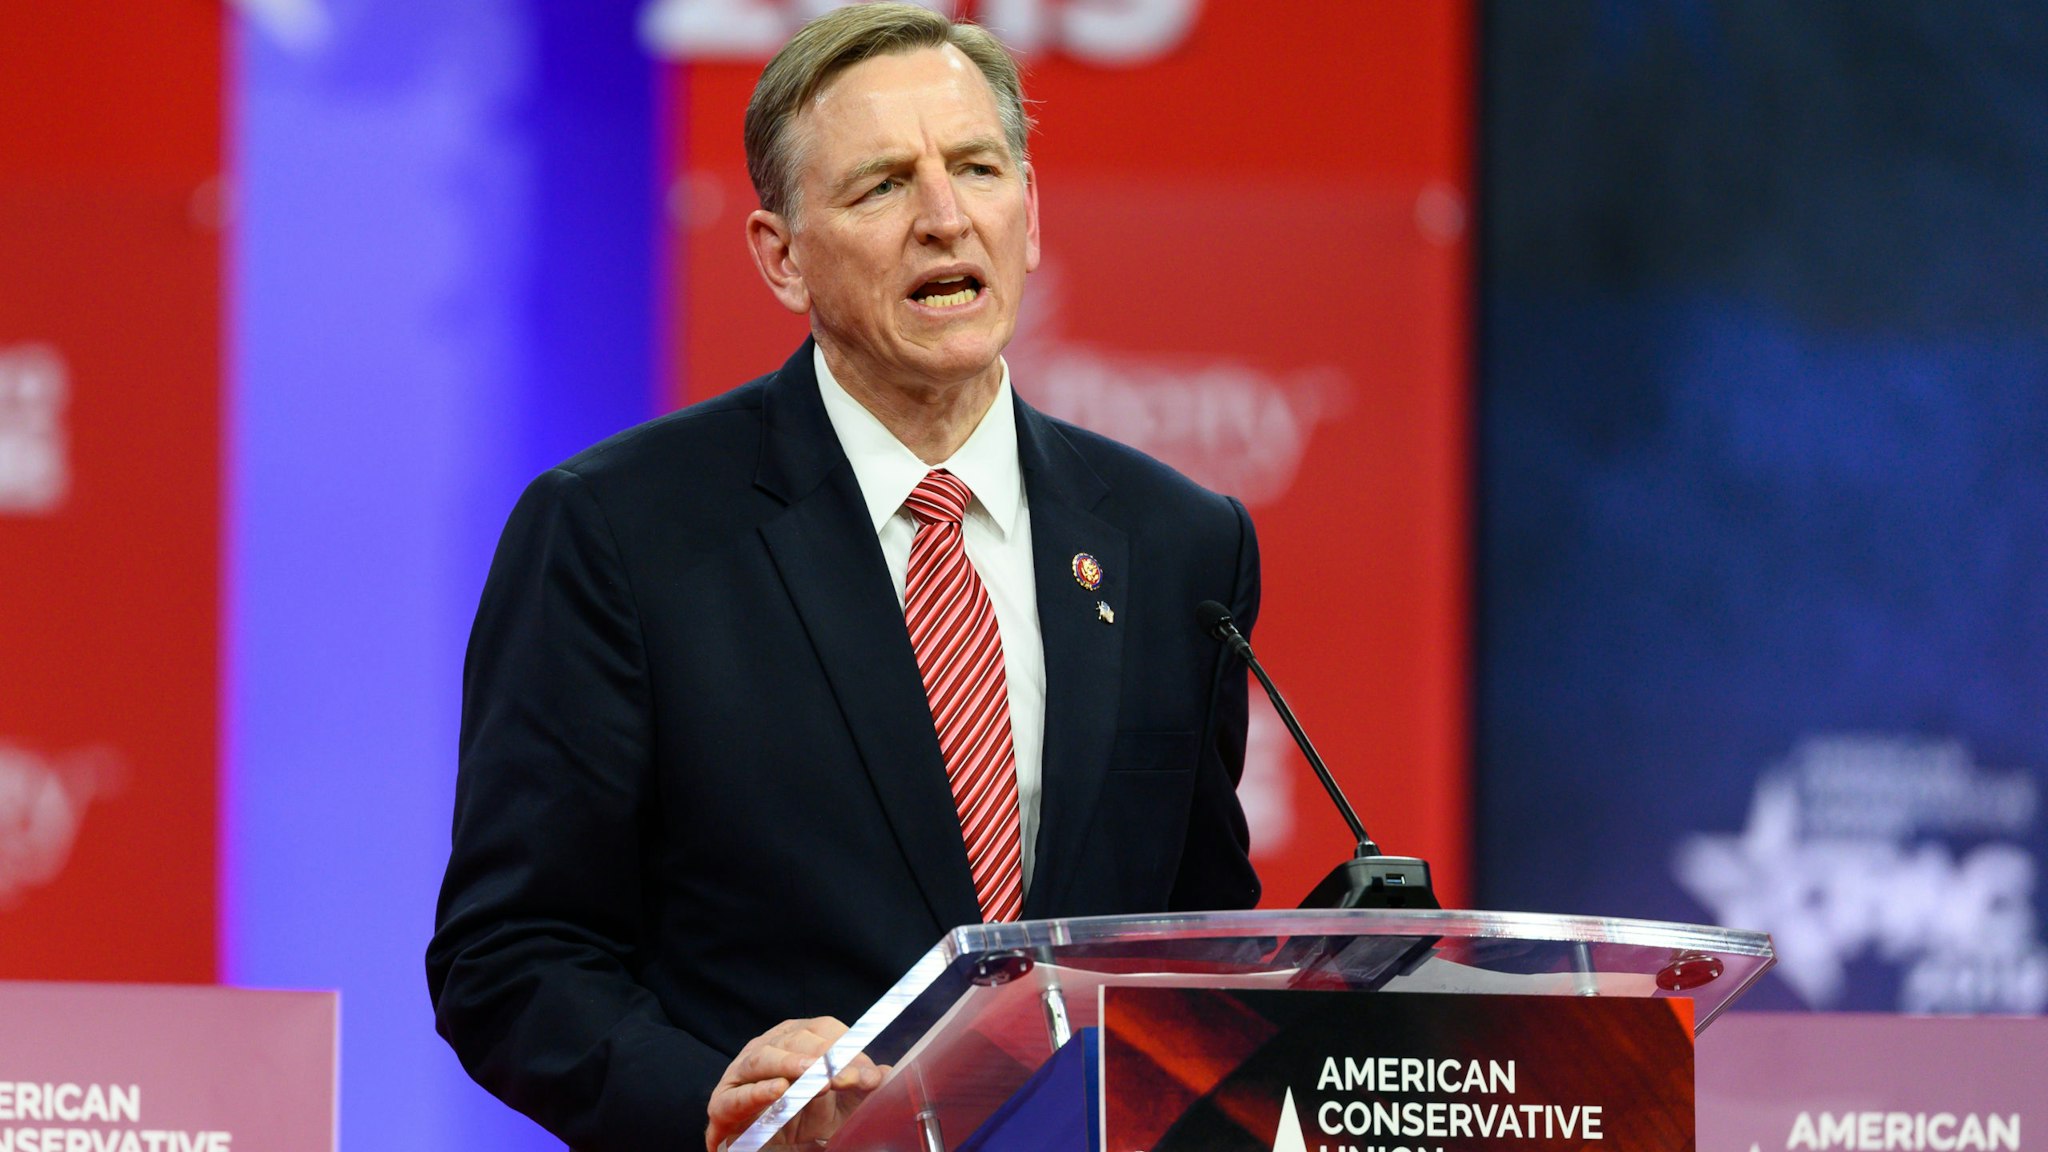 OXON HILL, MD, UNITED STATES - 2019/02/28: U.S. Representative Paul Gosar (R-AZ) seen speaking during the American Conservative Union's Conservative Political Action Conference (CPAC) at the Gaylord National Resort & Convention Center in Oxon Hill, MD. (Photo by Michael Brochstein/SOPA Images/LightRocket via Getty Images)